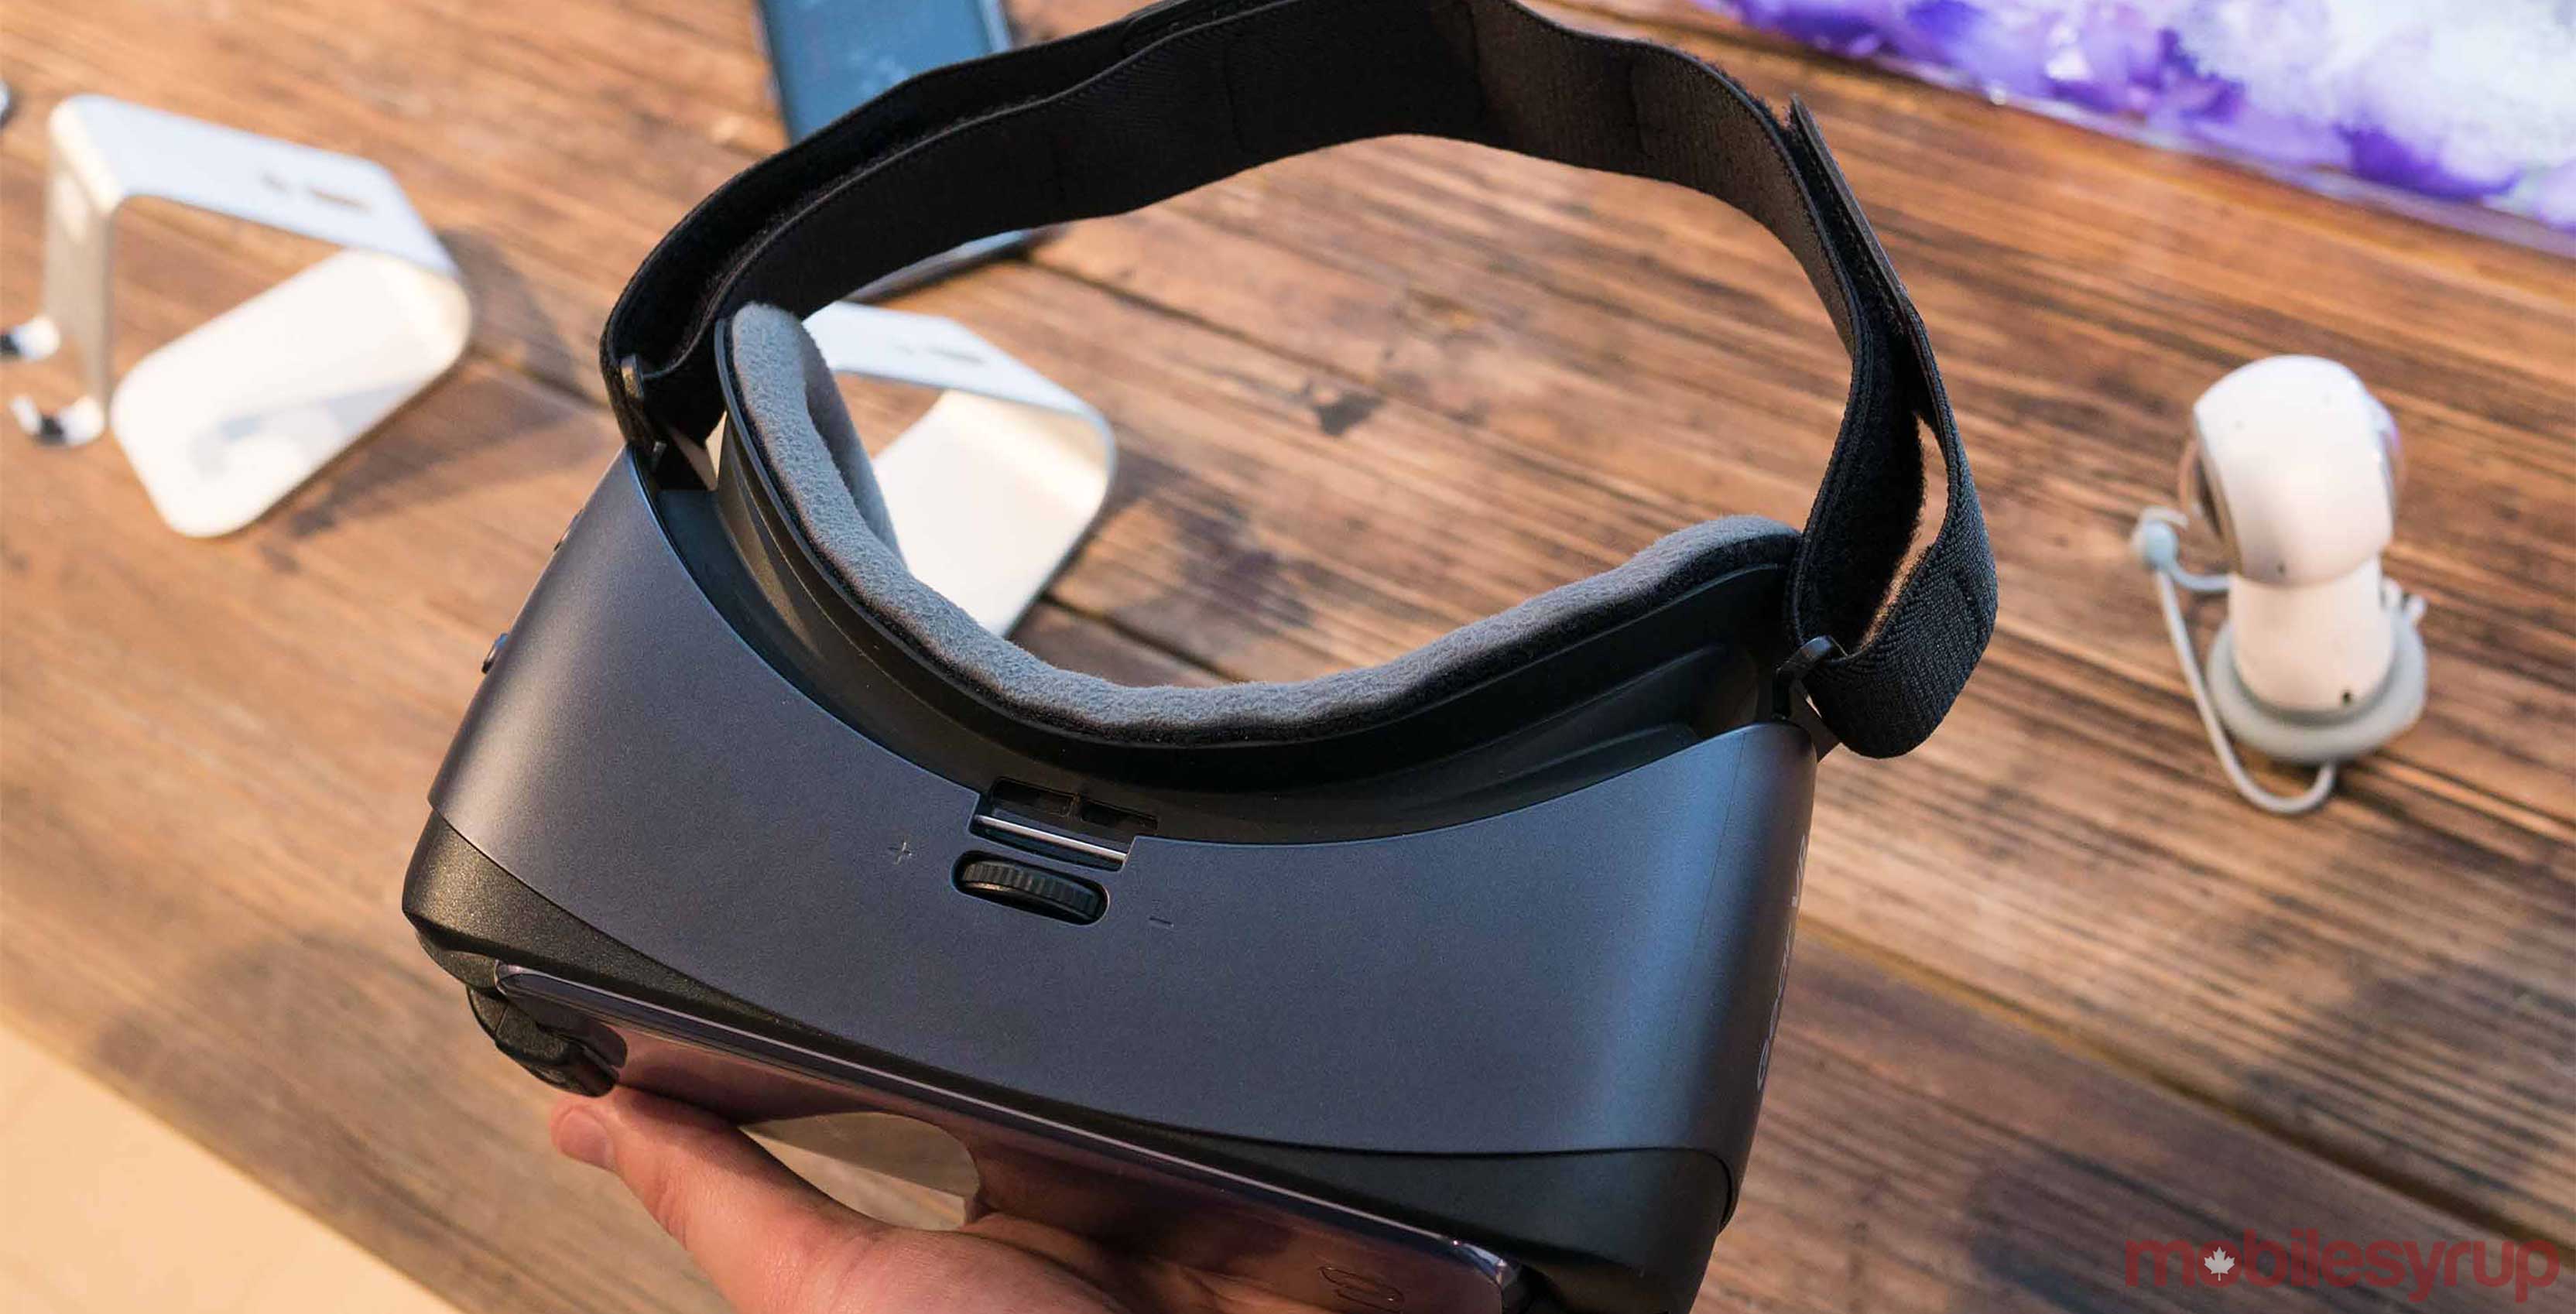 Gear VR in hand